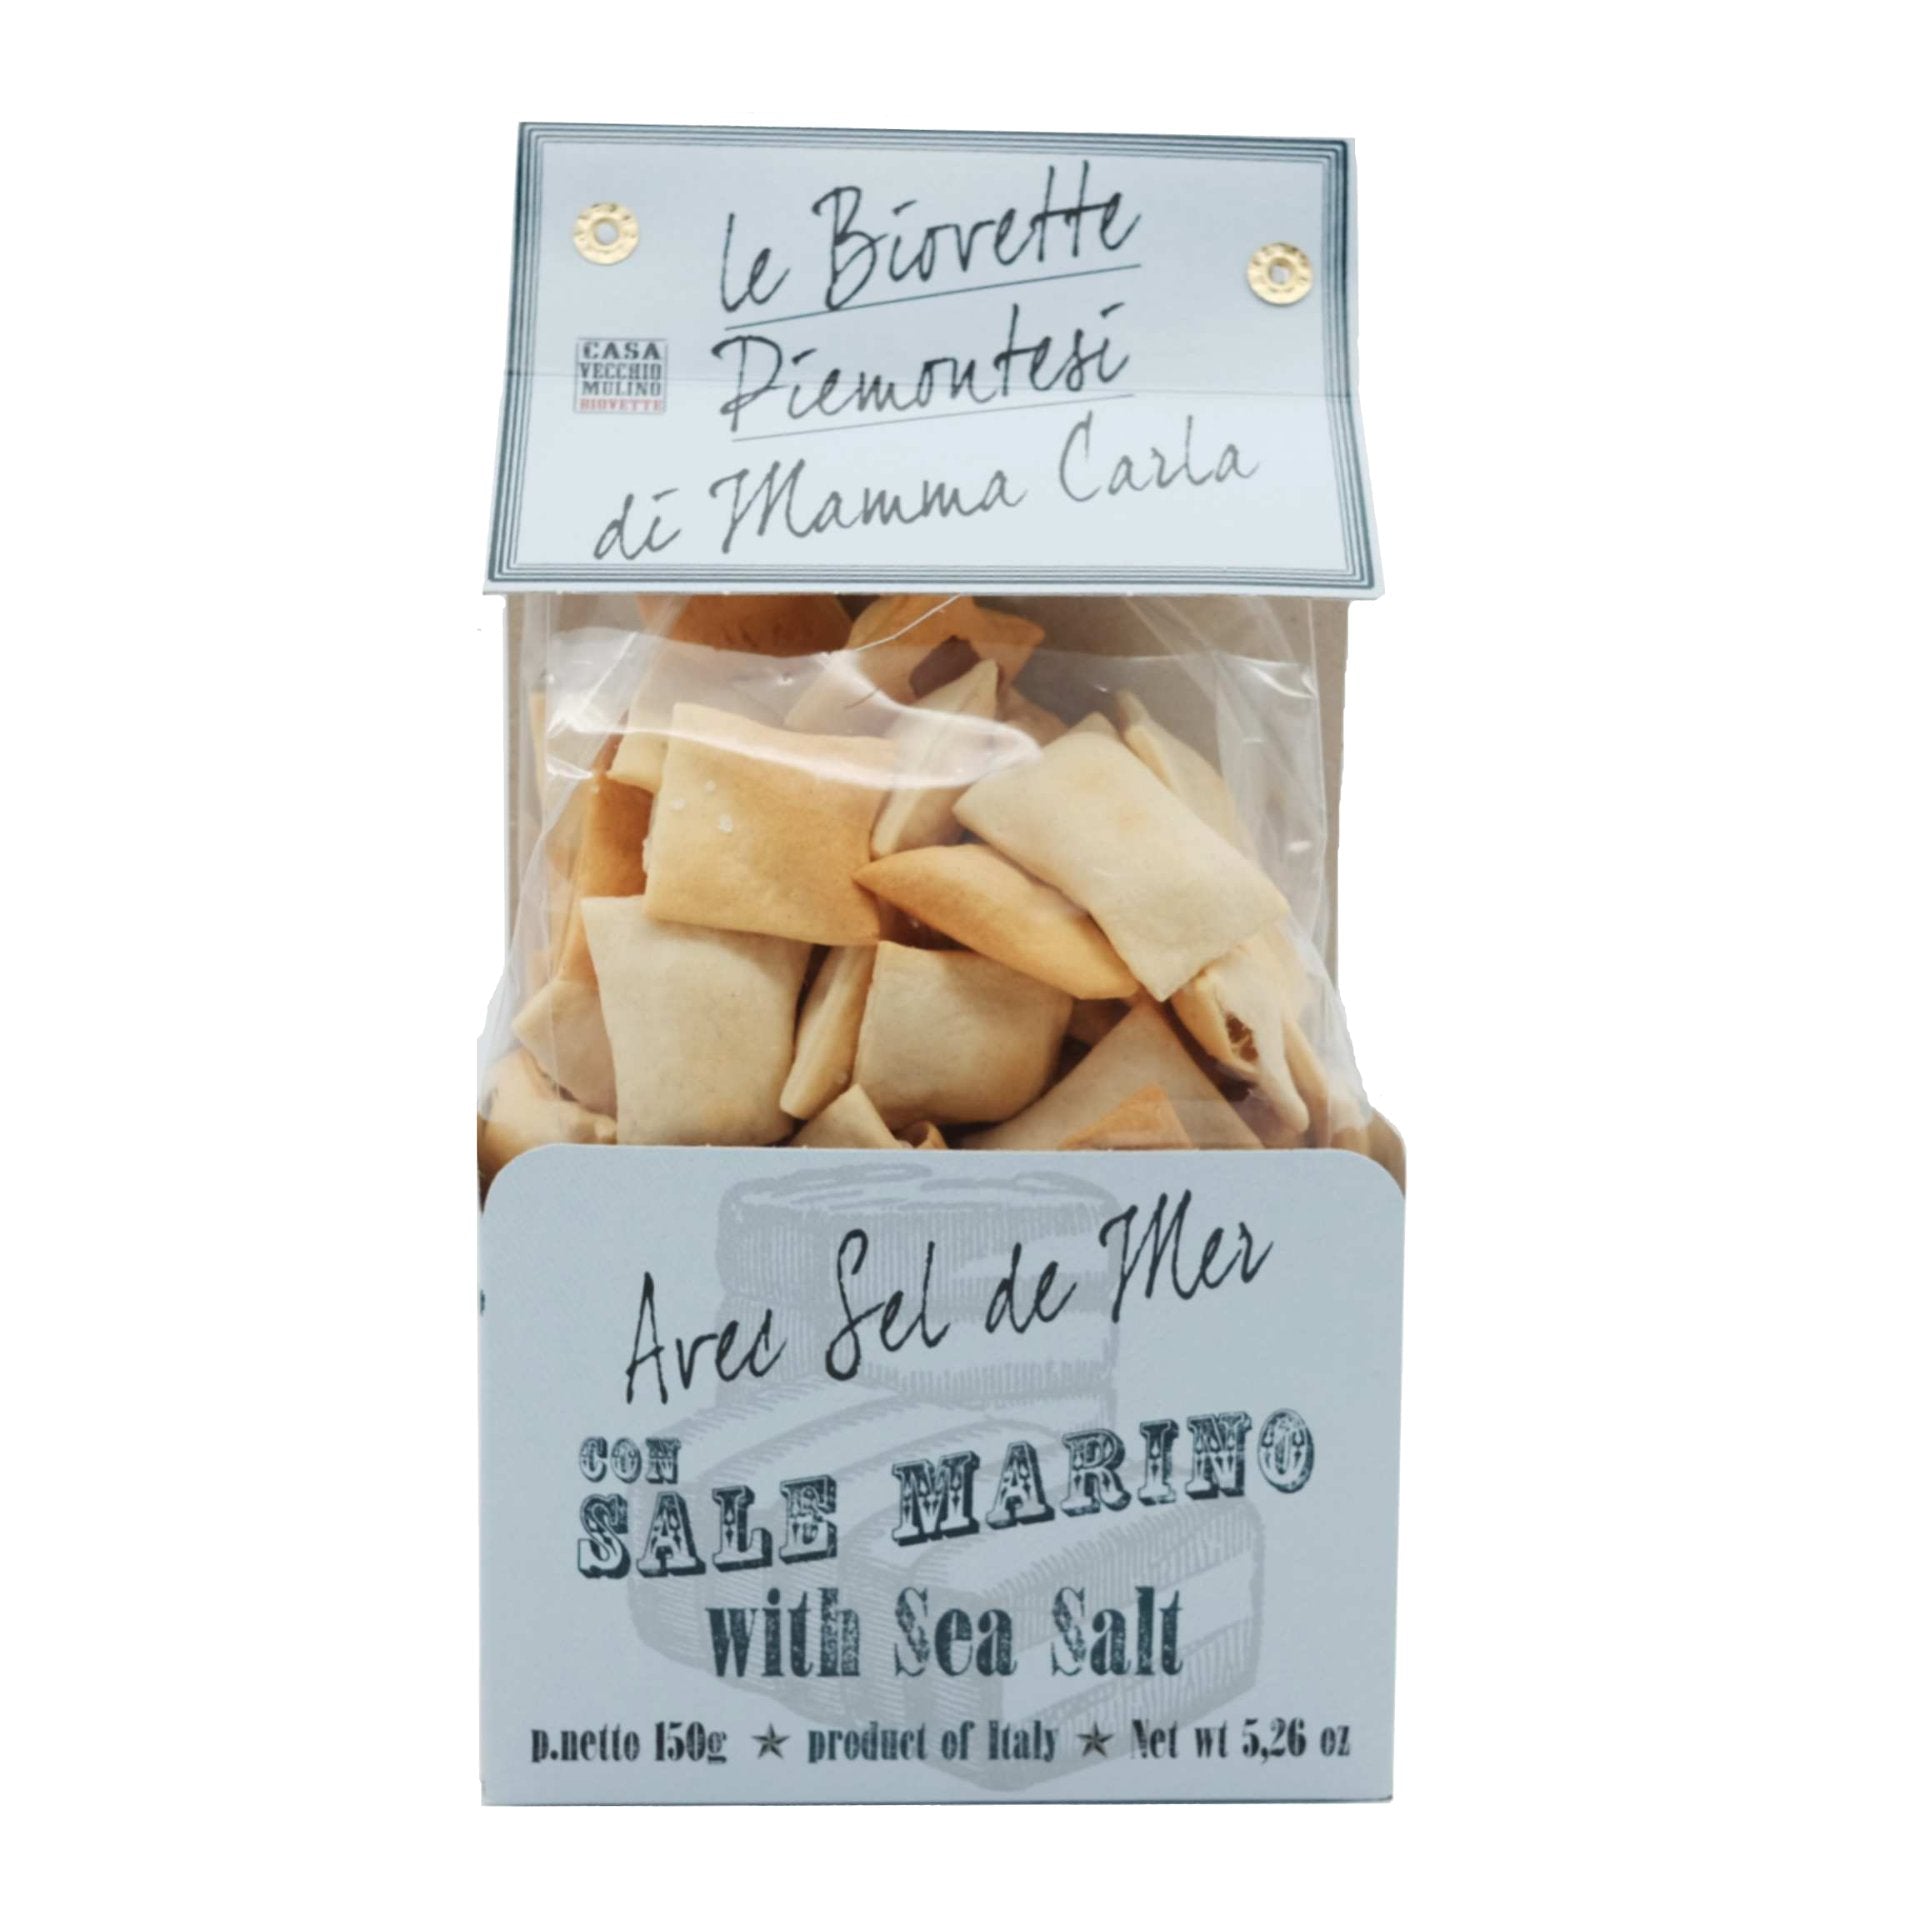 Casa Vecchio Mulino Biovette with Sea Salt 150g  | Imported and distributed in the UK by Just Gourmet Foods